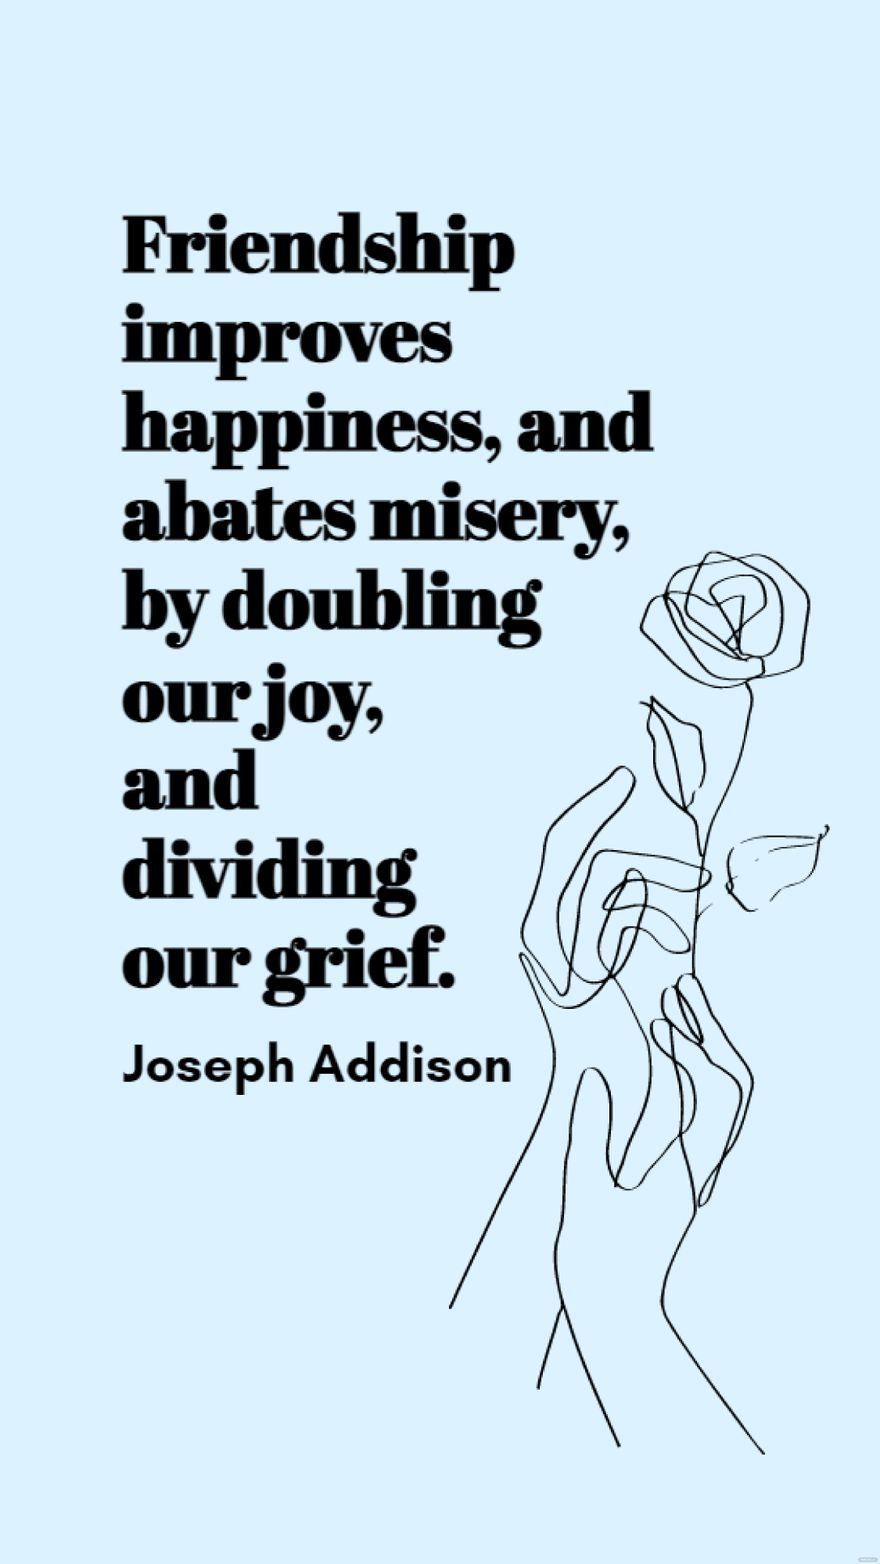 Joseph Addison - Friendship improves happiness, and abates misery, by doubling our joy, and dividing our grief.